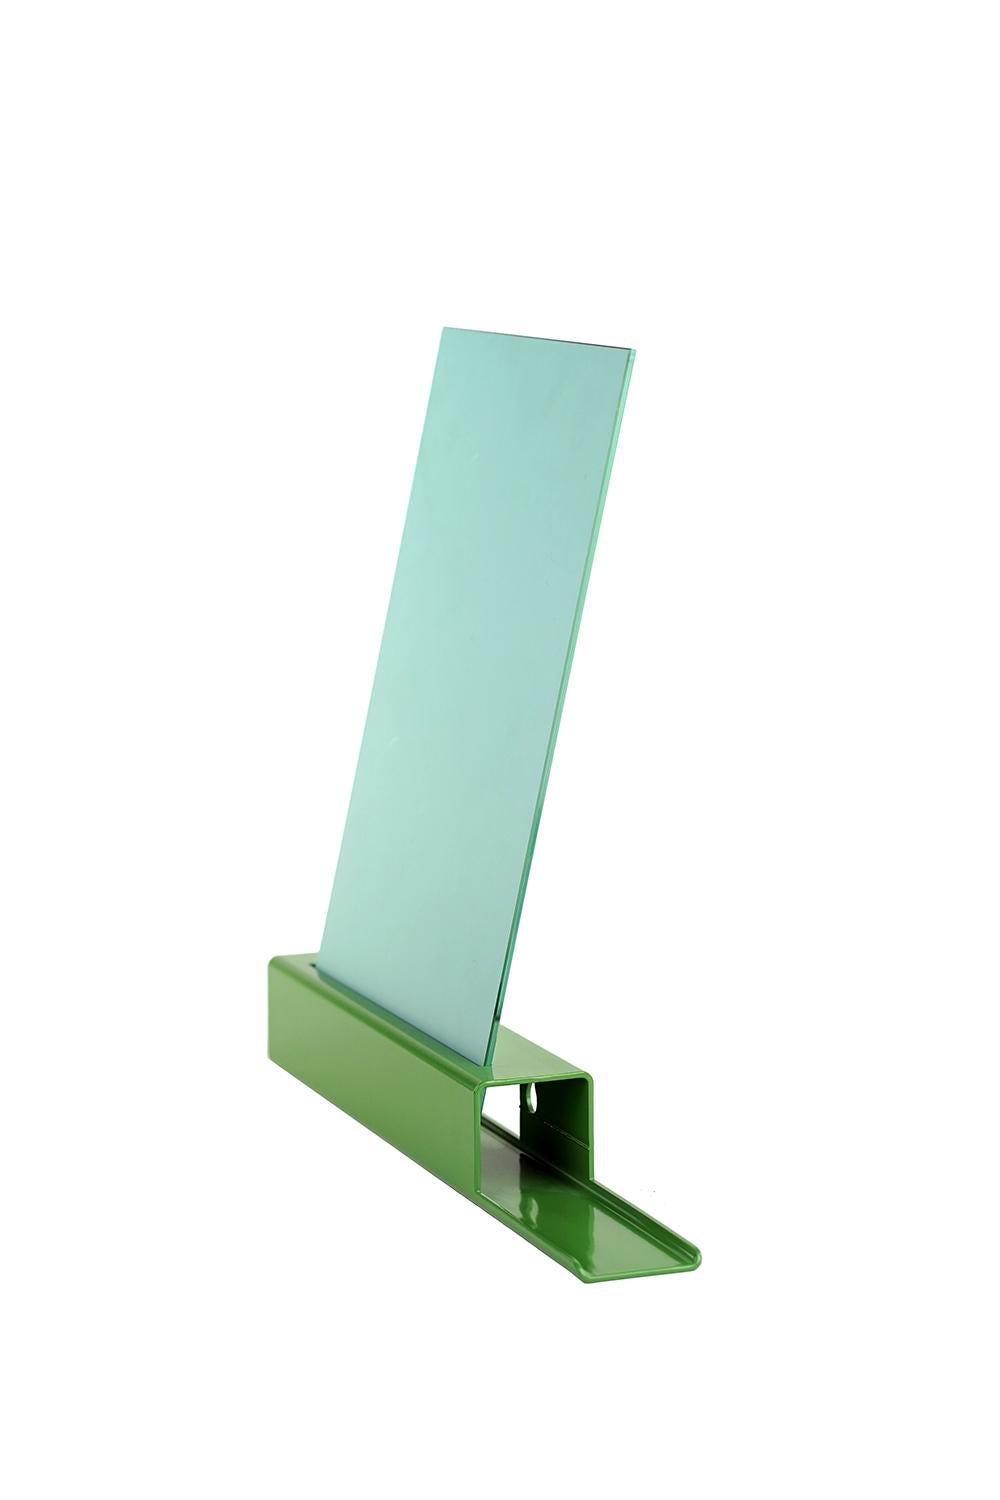 The M1 (Mirror 1) is a line of mirrors. This industrial yet elegant design is available in various versions, colours and sizes. Alone or in combination, you can make a statement out of functionality. Due to the timeless design incorporated in an